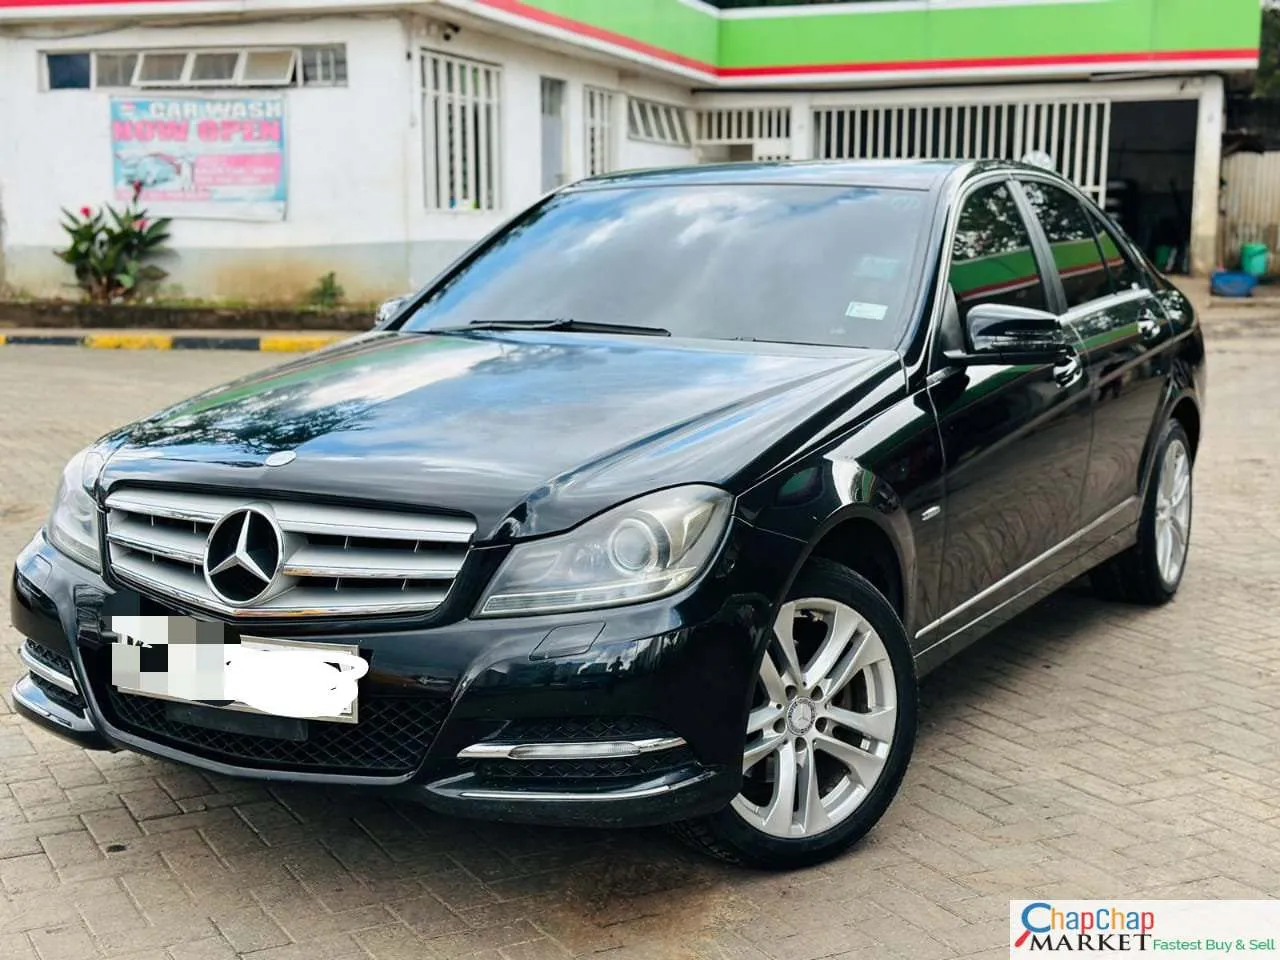 Mercedes Benz C200 QUICK SALE 🔥 You Pay 30% DEPOSIT Trade in OK EXCLUSIVE NEW